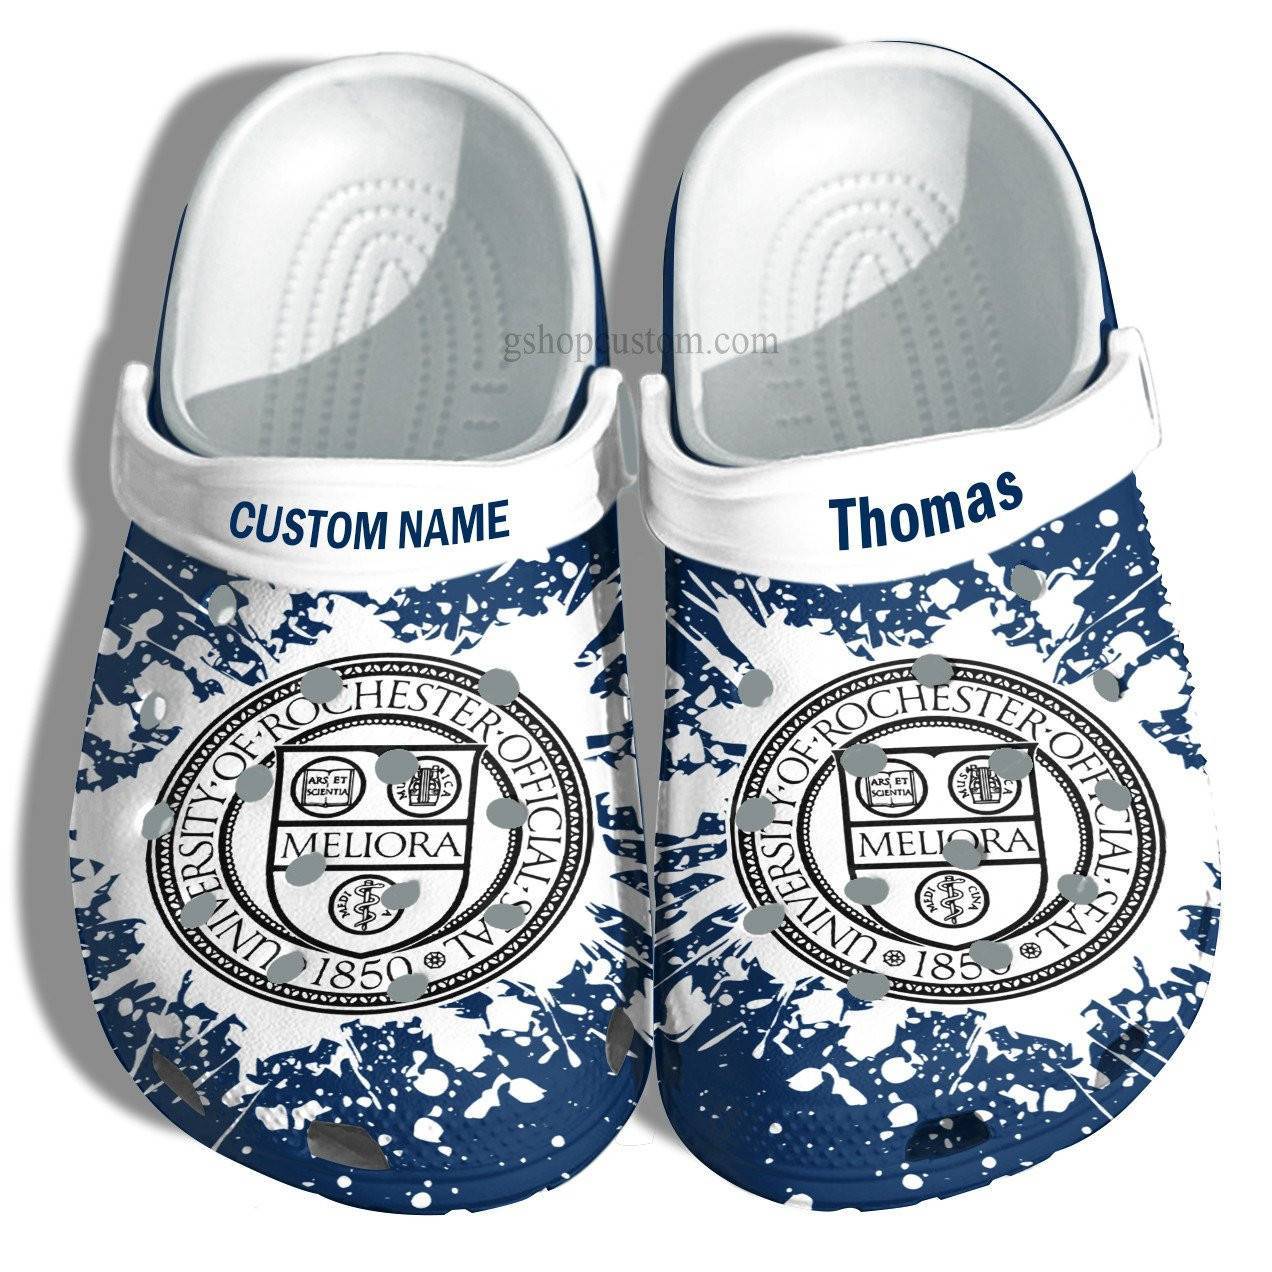 University Of Rochester Graduation Gifts Croc Shoes Customize – Admission Gift Crocss Shoes